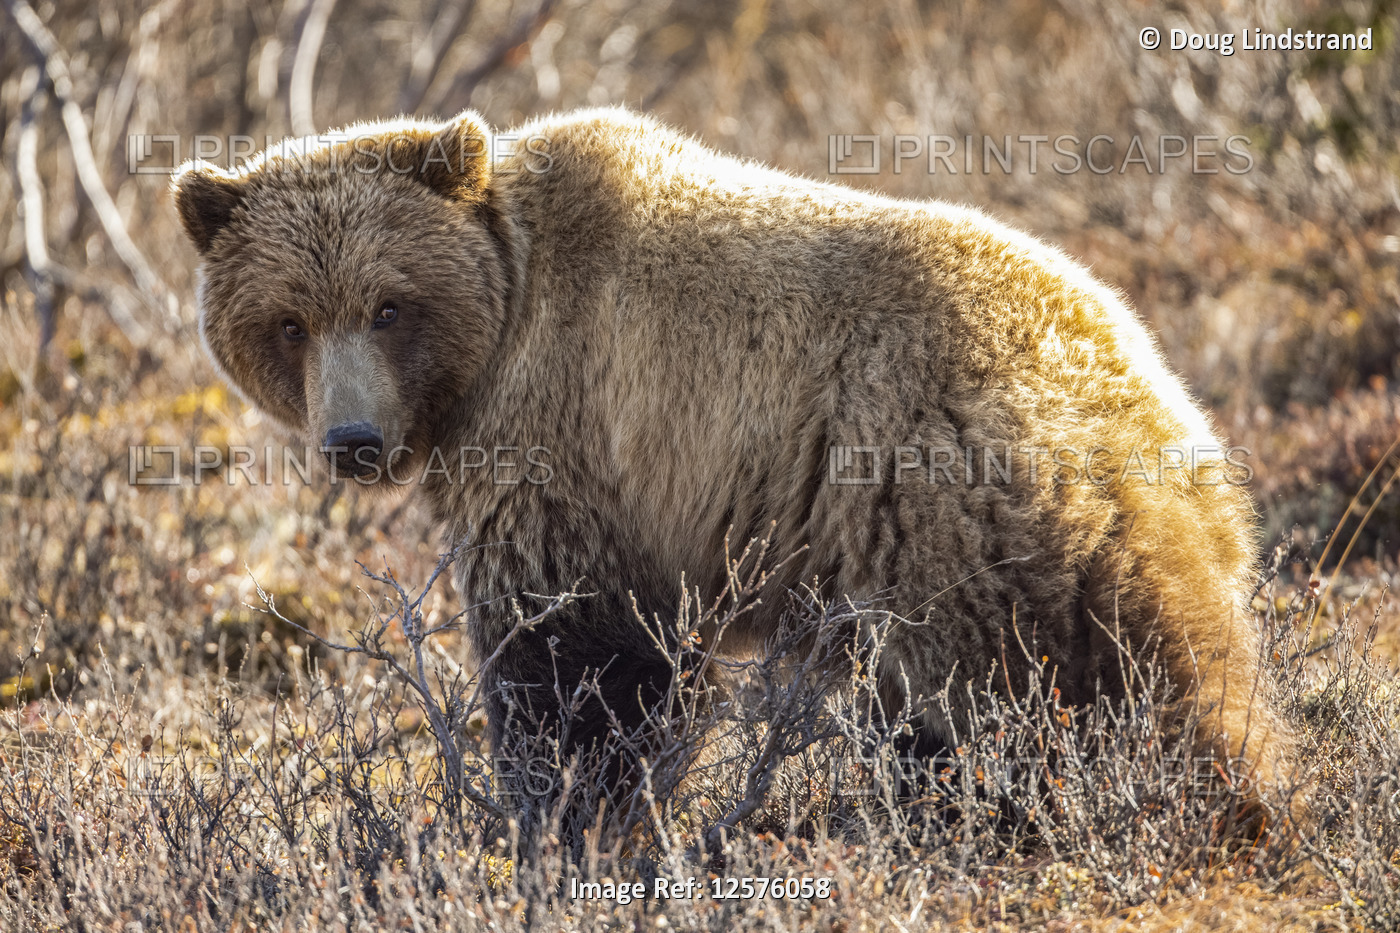 A roaming grizzly bear (Ursus arctos horribilis) pauses to look at the camera ...